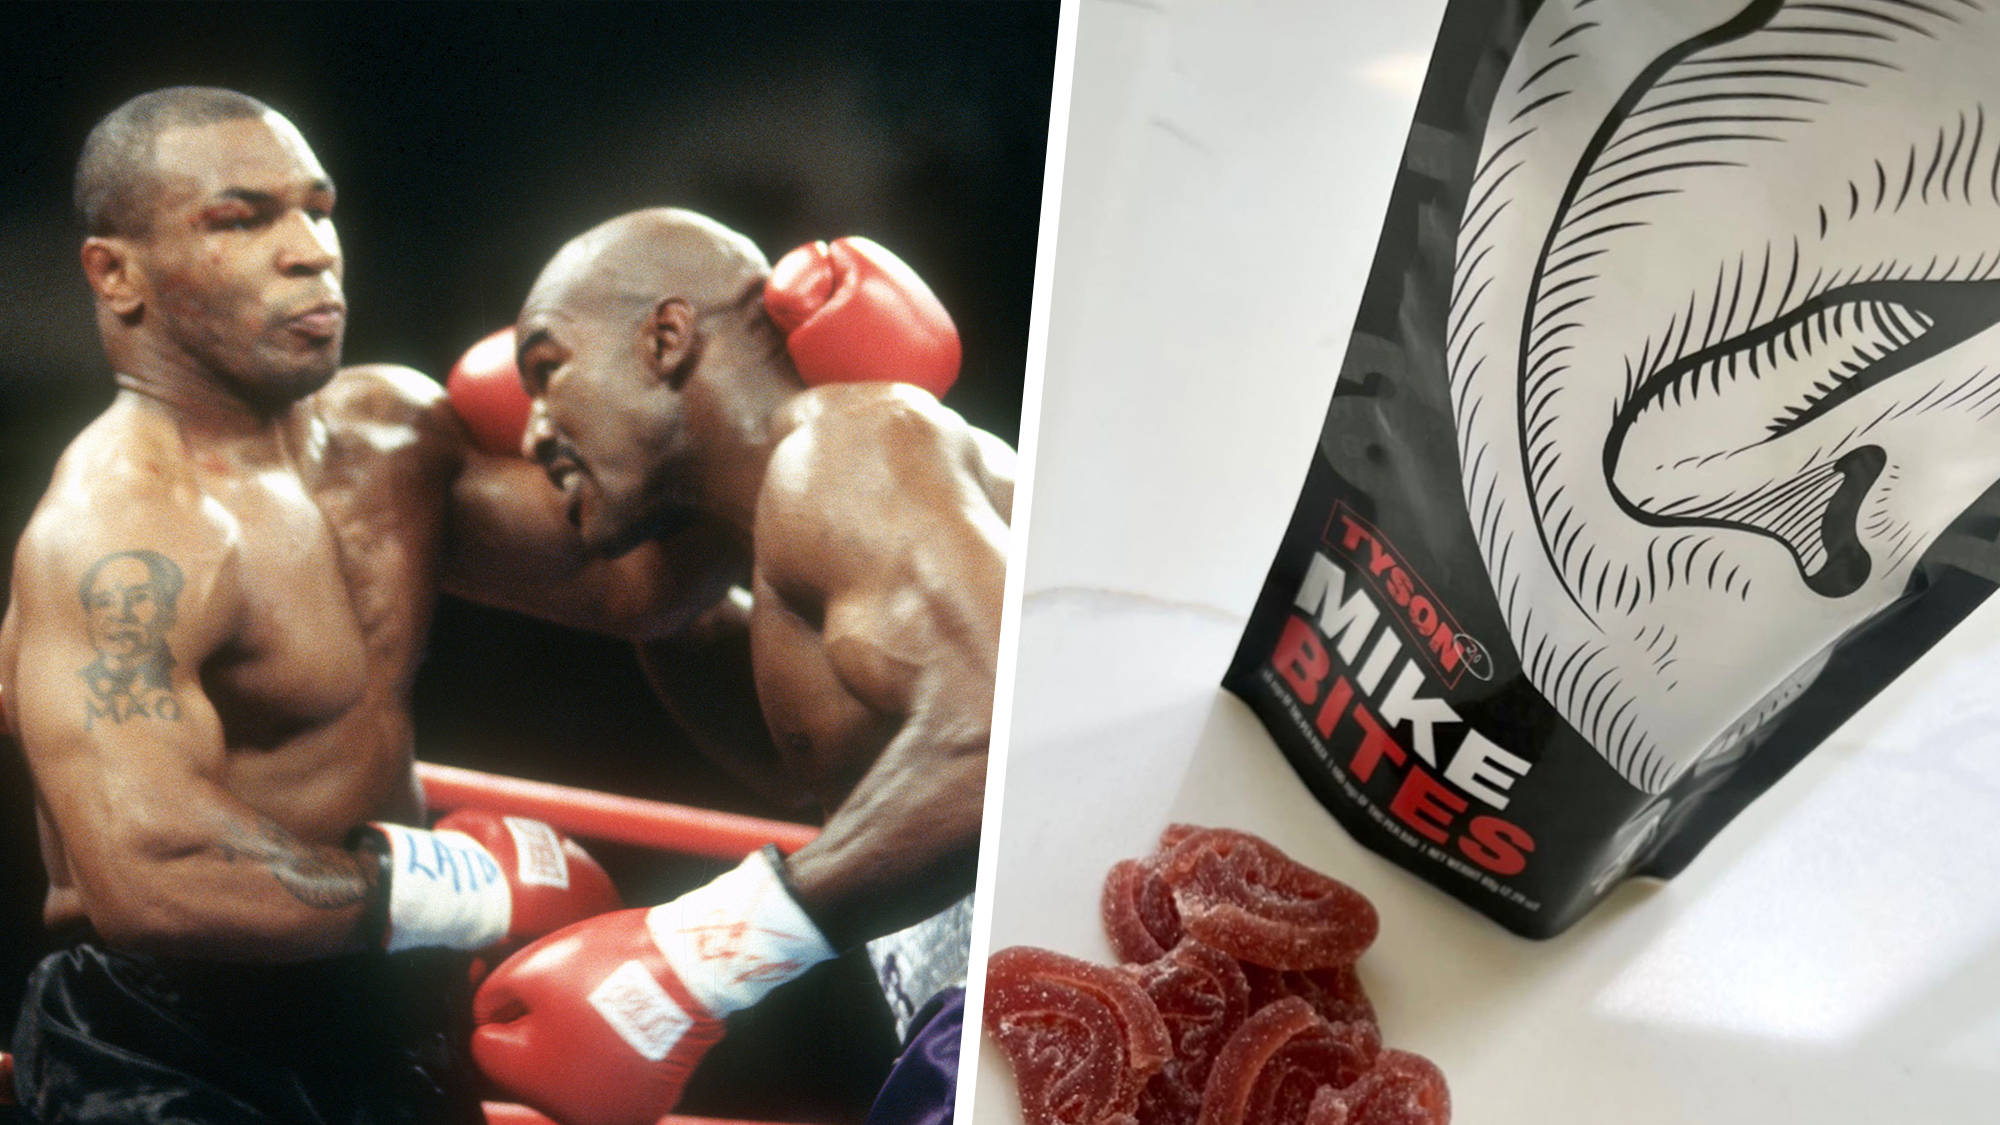 On the left is Tyson and Holyfield's boxing scene and on the right is the ear-shaped cannabis and its packaging